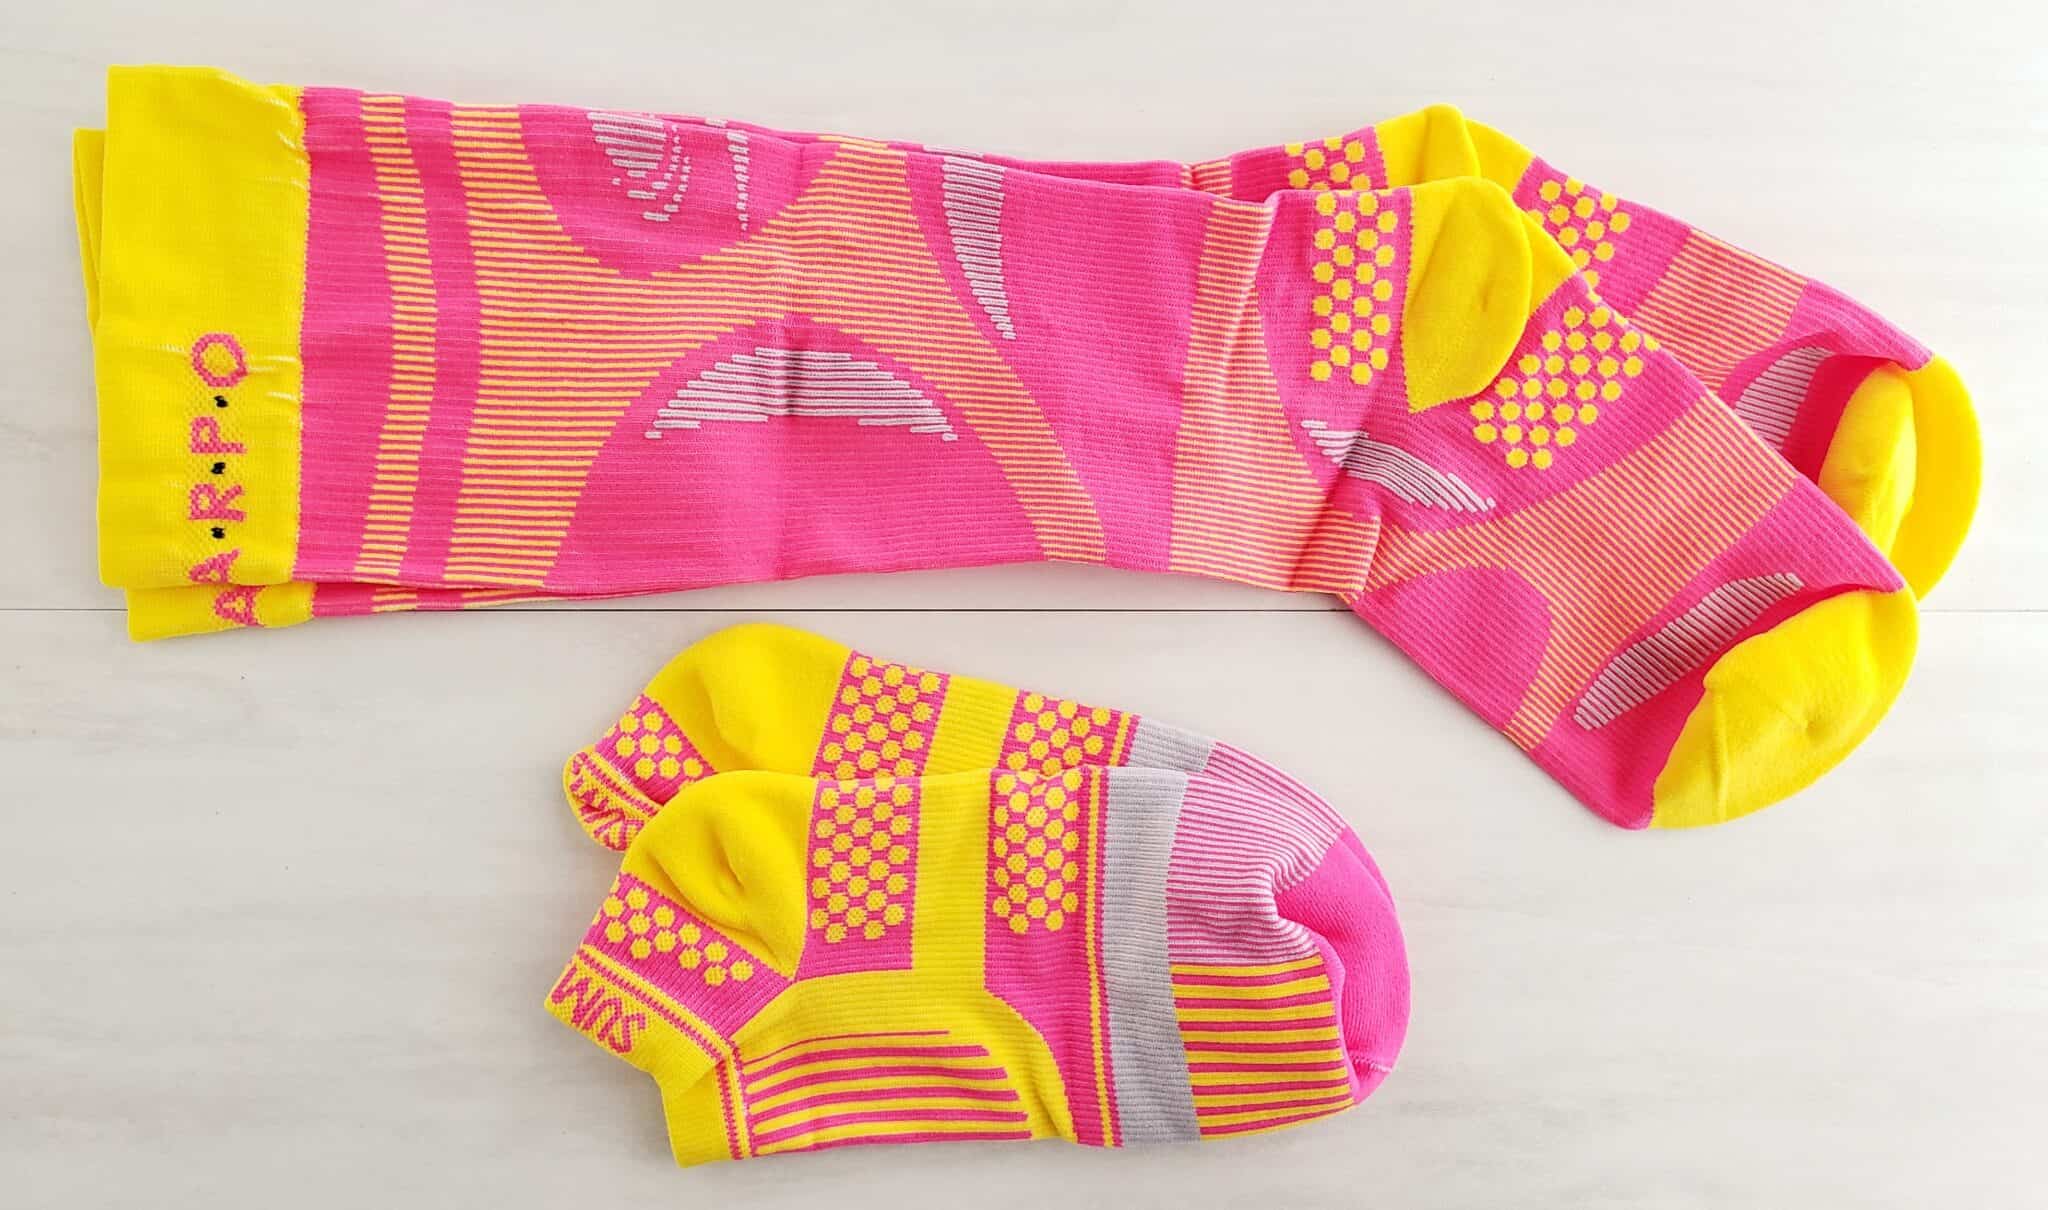 Two pairs of pink compression socks.